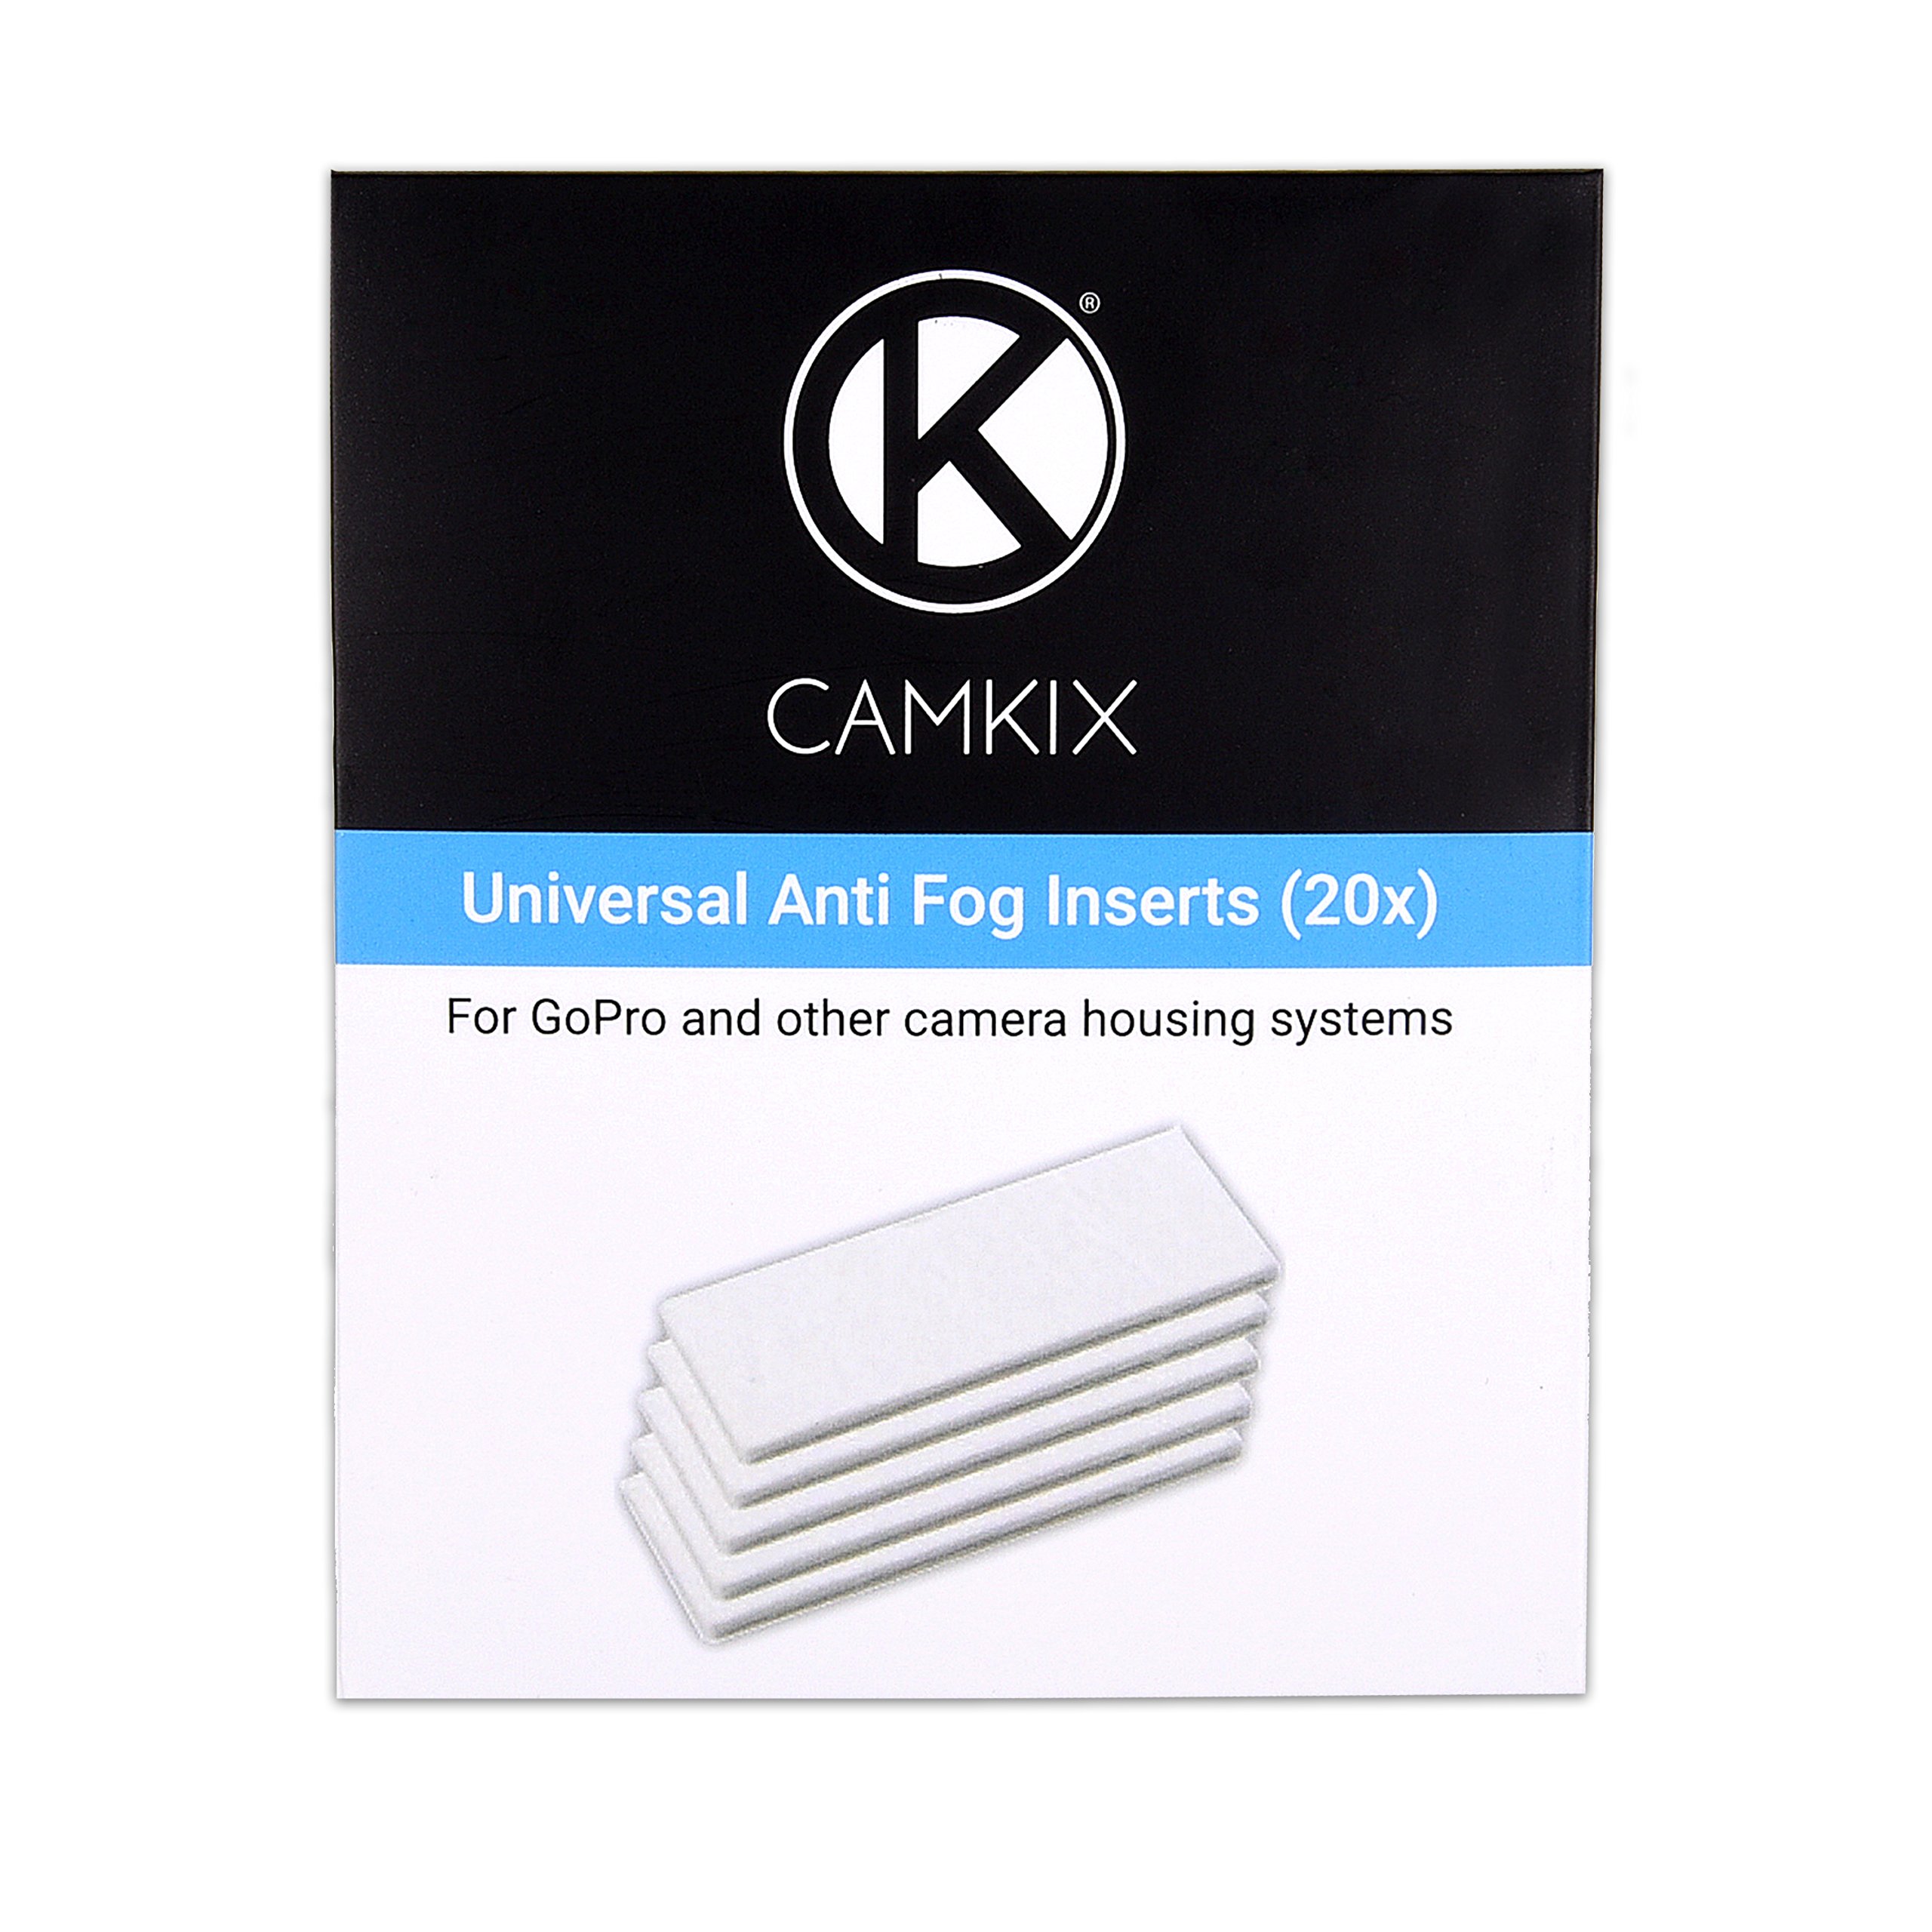 Book Cover CamKix Anti-Fog Inserts for Gopro Hero 4 Black, Silver, 3+, 3, 2, 1 and Other Camera and Housing Systems - 20 Pack Reusable Moisture Removing Inserts